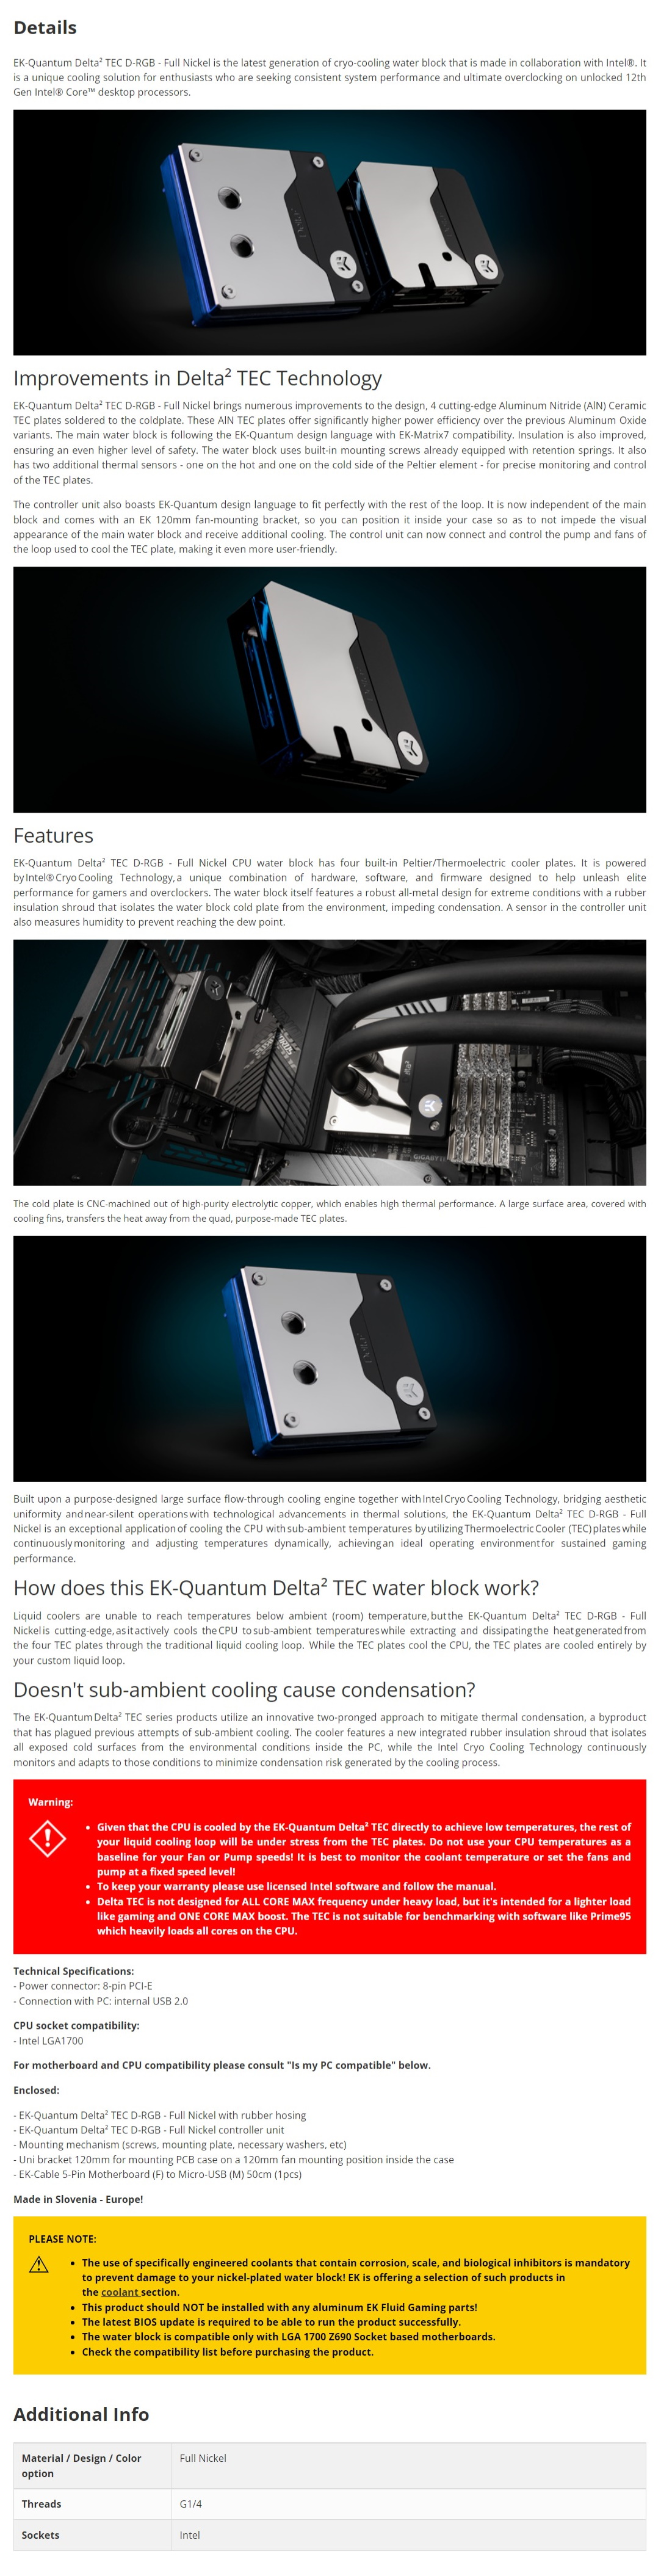 A large marketing image providing additional information about the product EK Quantum Delta2 TEC D-RGB - Full Nickel CPU Waterblock - Additional alt info not provided